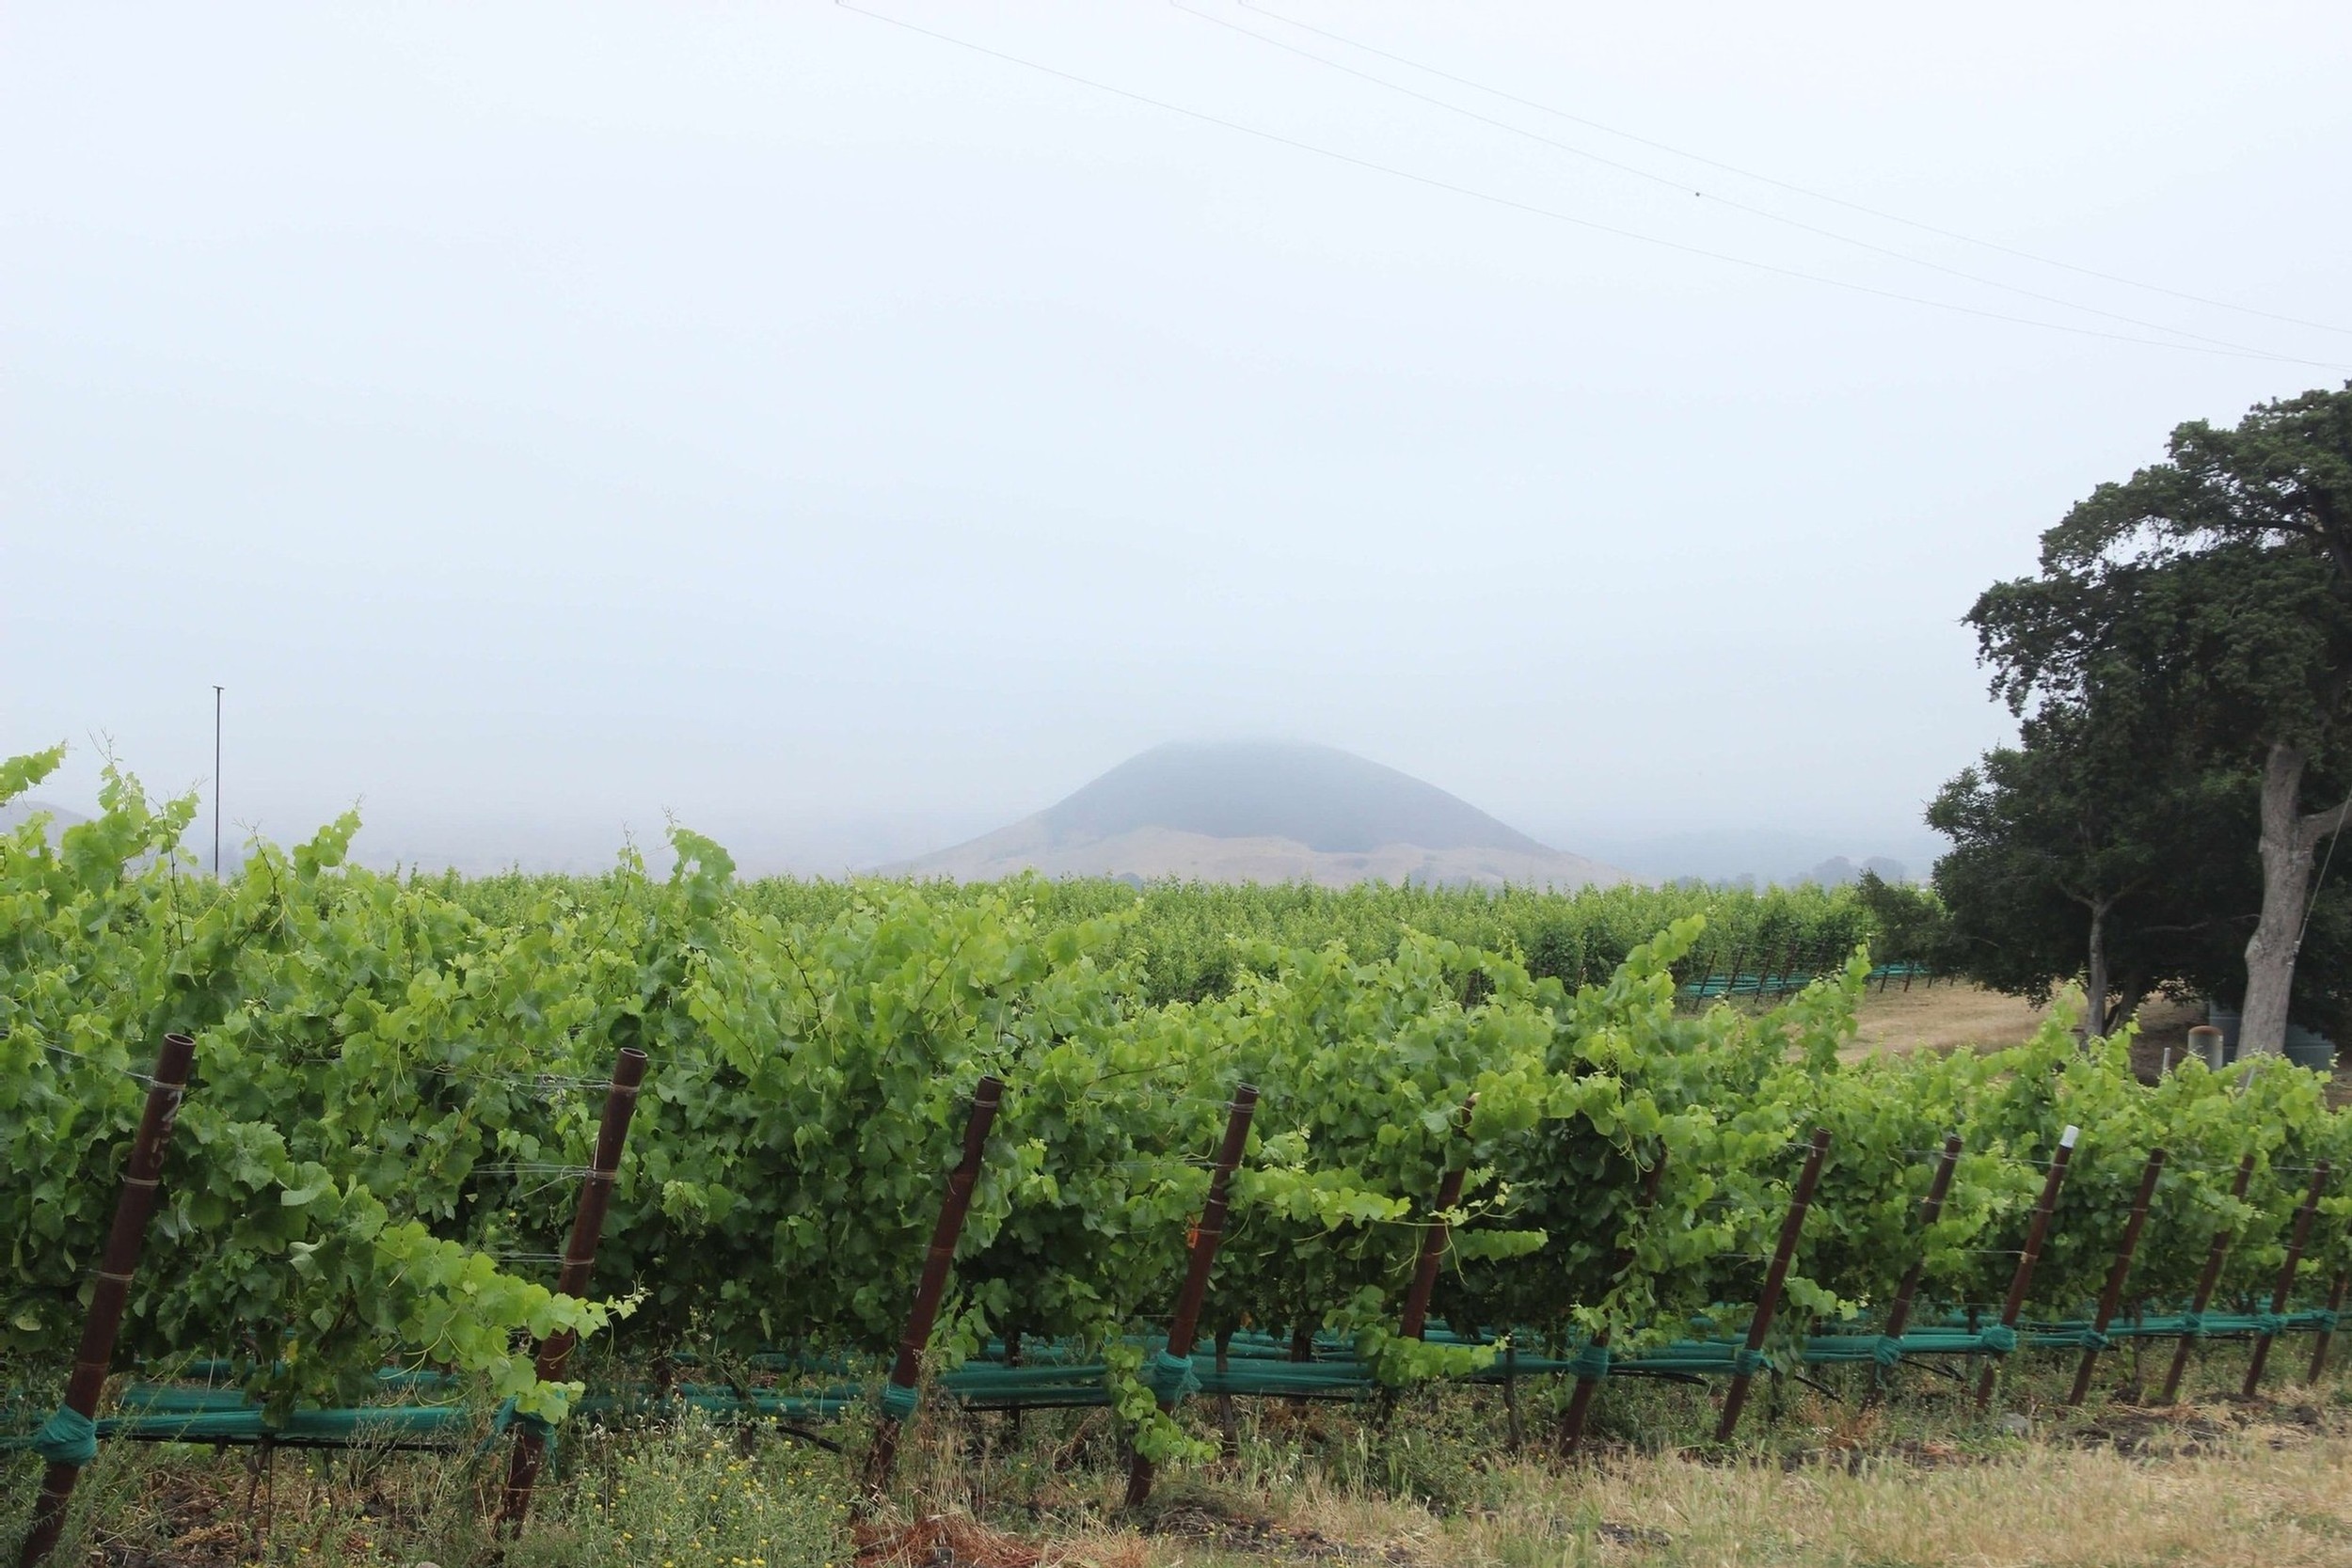 Vines with full canopies at a foggy Jespersen ranch